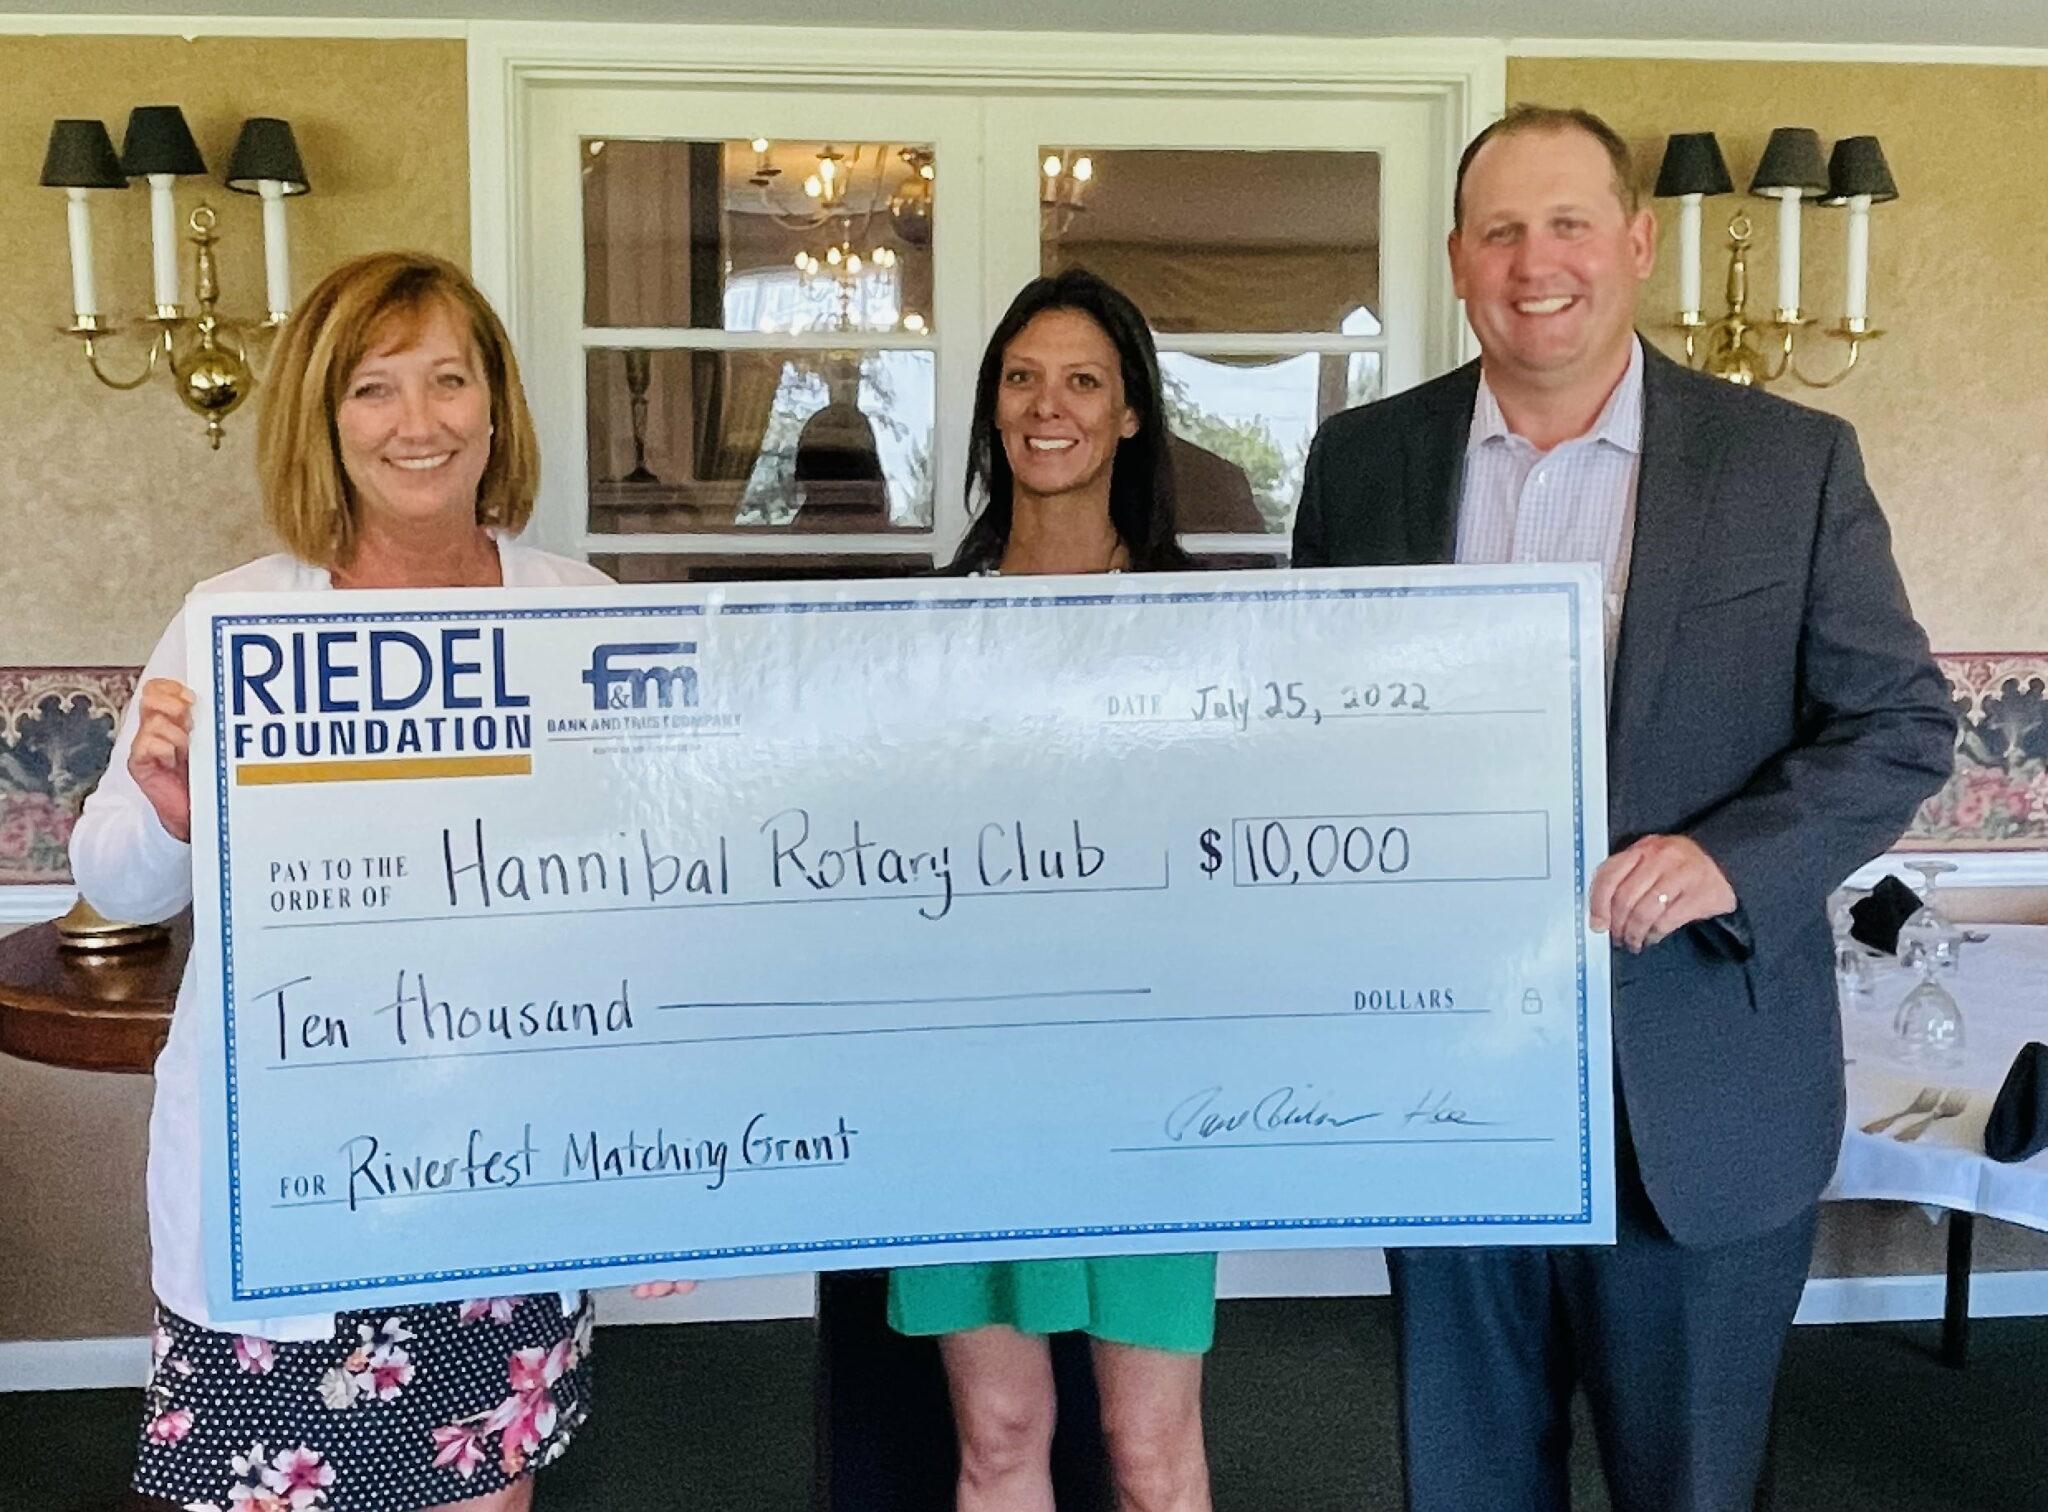 Riedel Administrator Sarah Deien presents a check to the Hannibal Rotary Club to establish the Good Dads program.